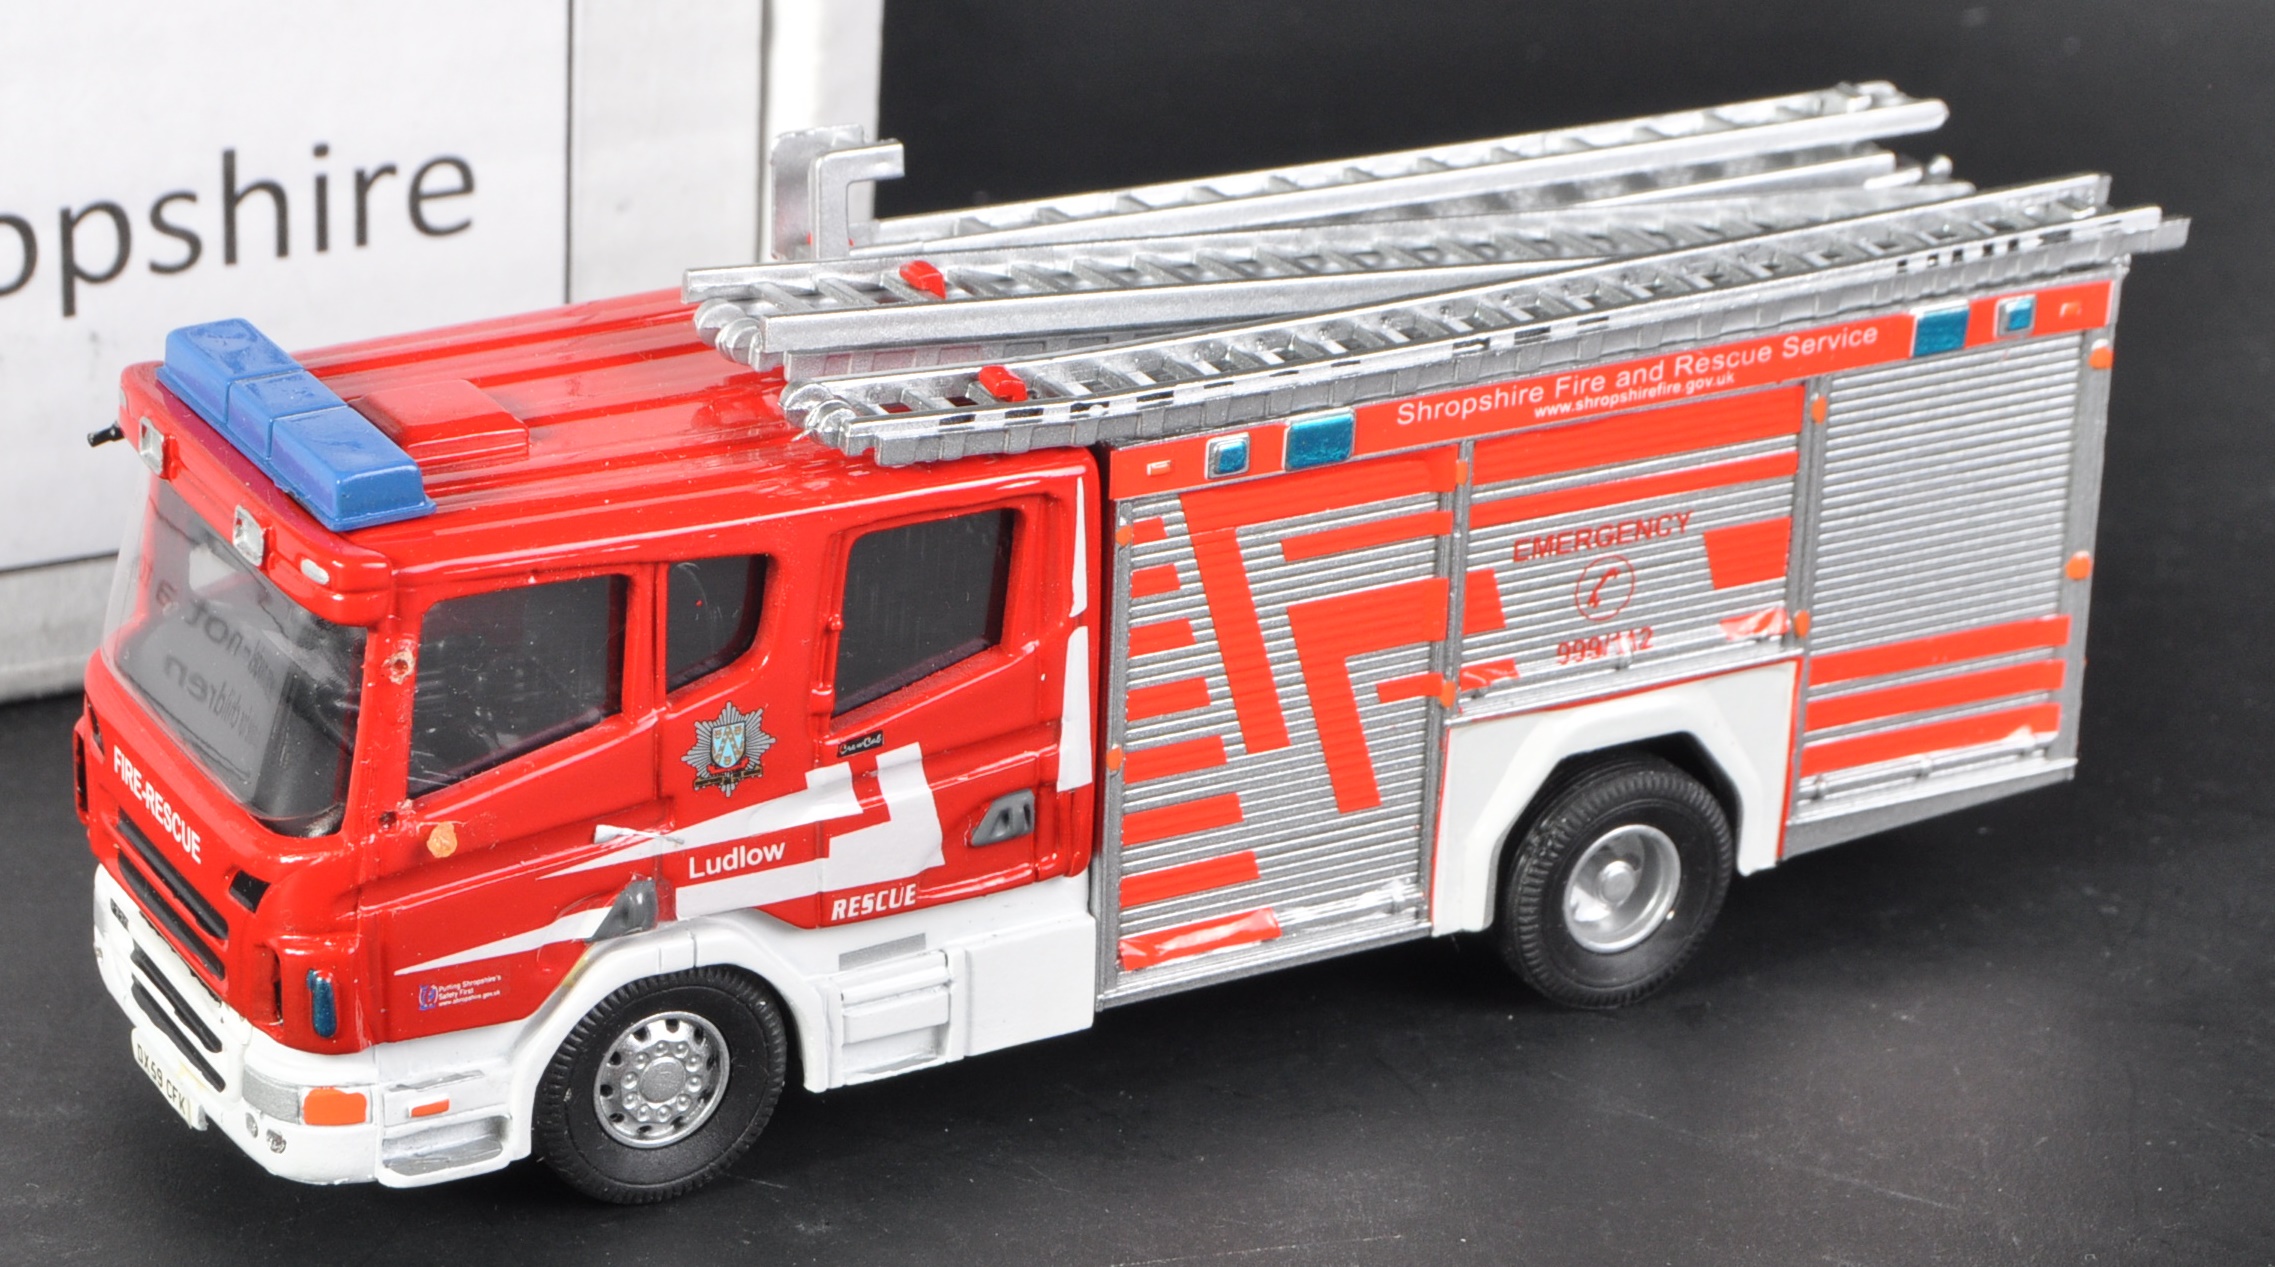 FIRE BRIGADE MODELS 1/50 SCALE DIECAST MODEL FIRE ENGINE - Image 2 of 6